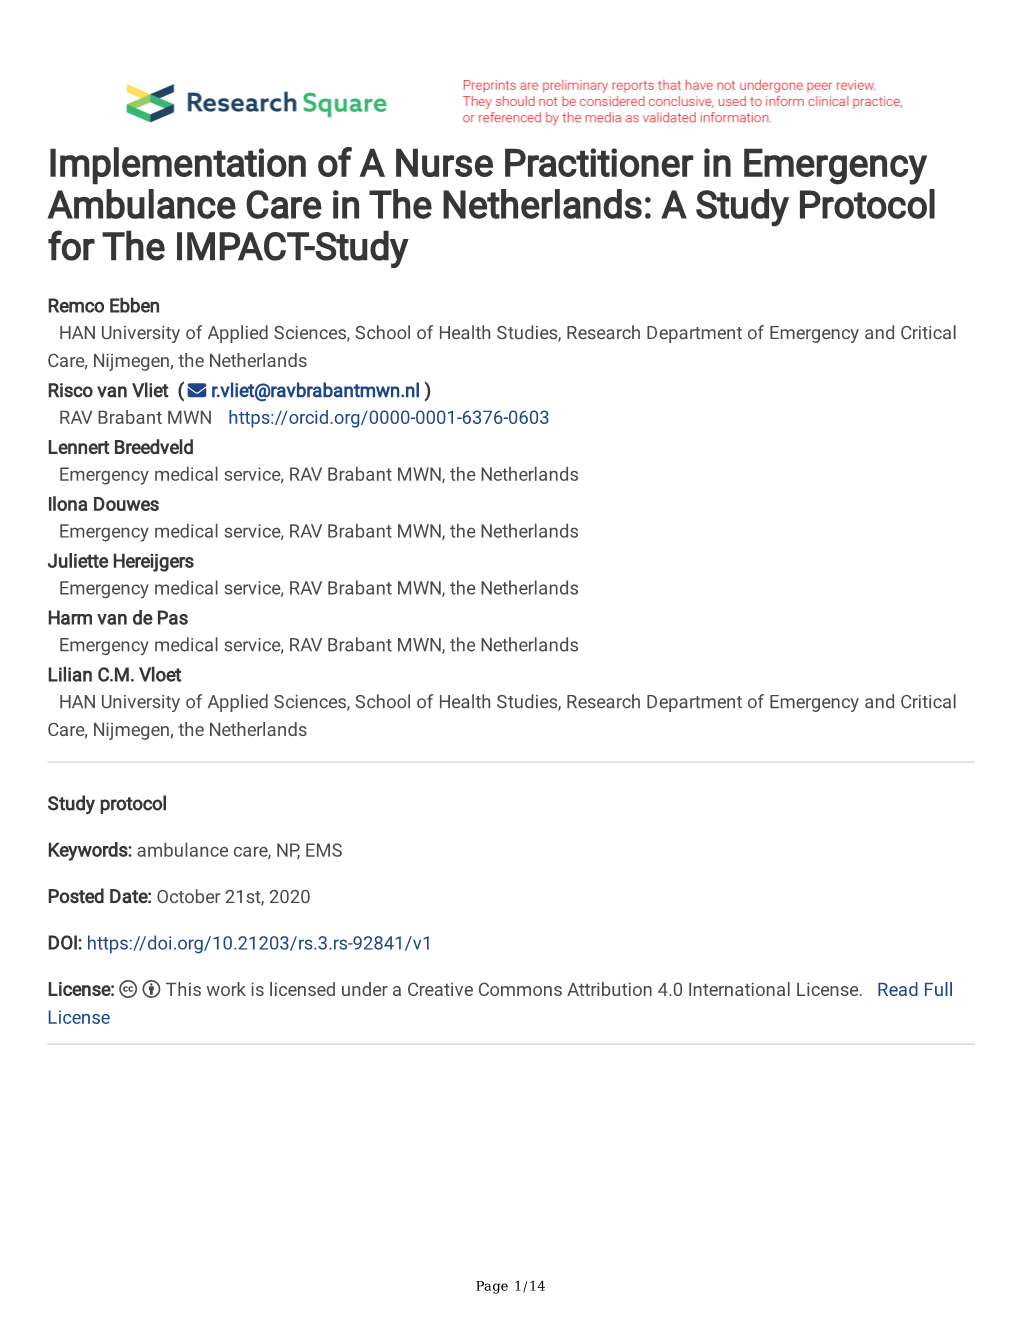 Implementation of a Nurse Practitioner in Emergency Ambulance Care in the Netherlands: a Study Protocol for the IMPACT-Study